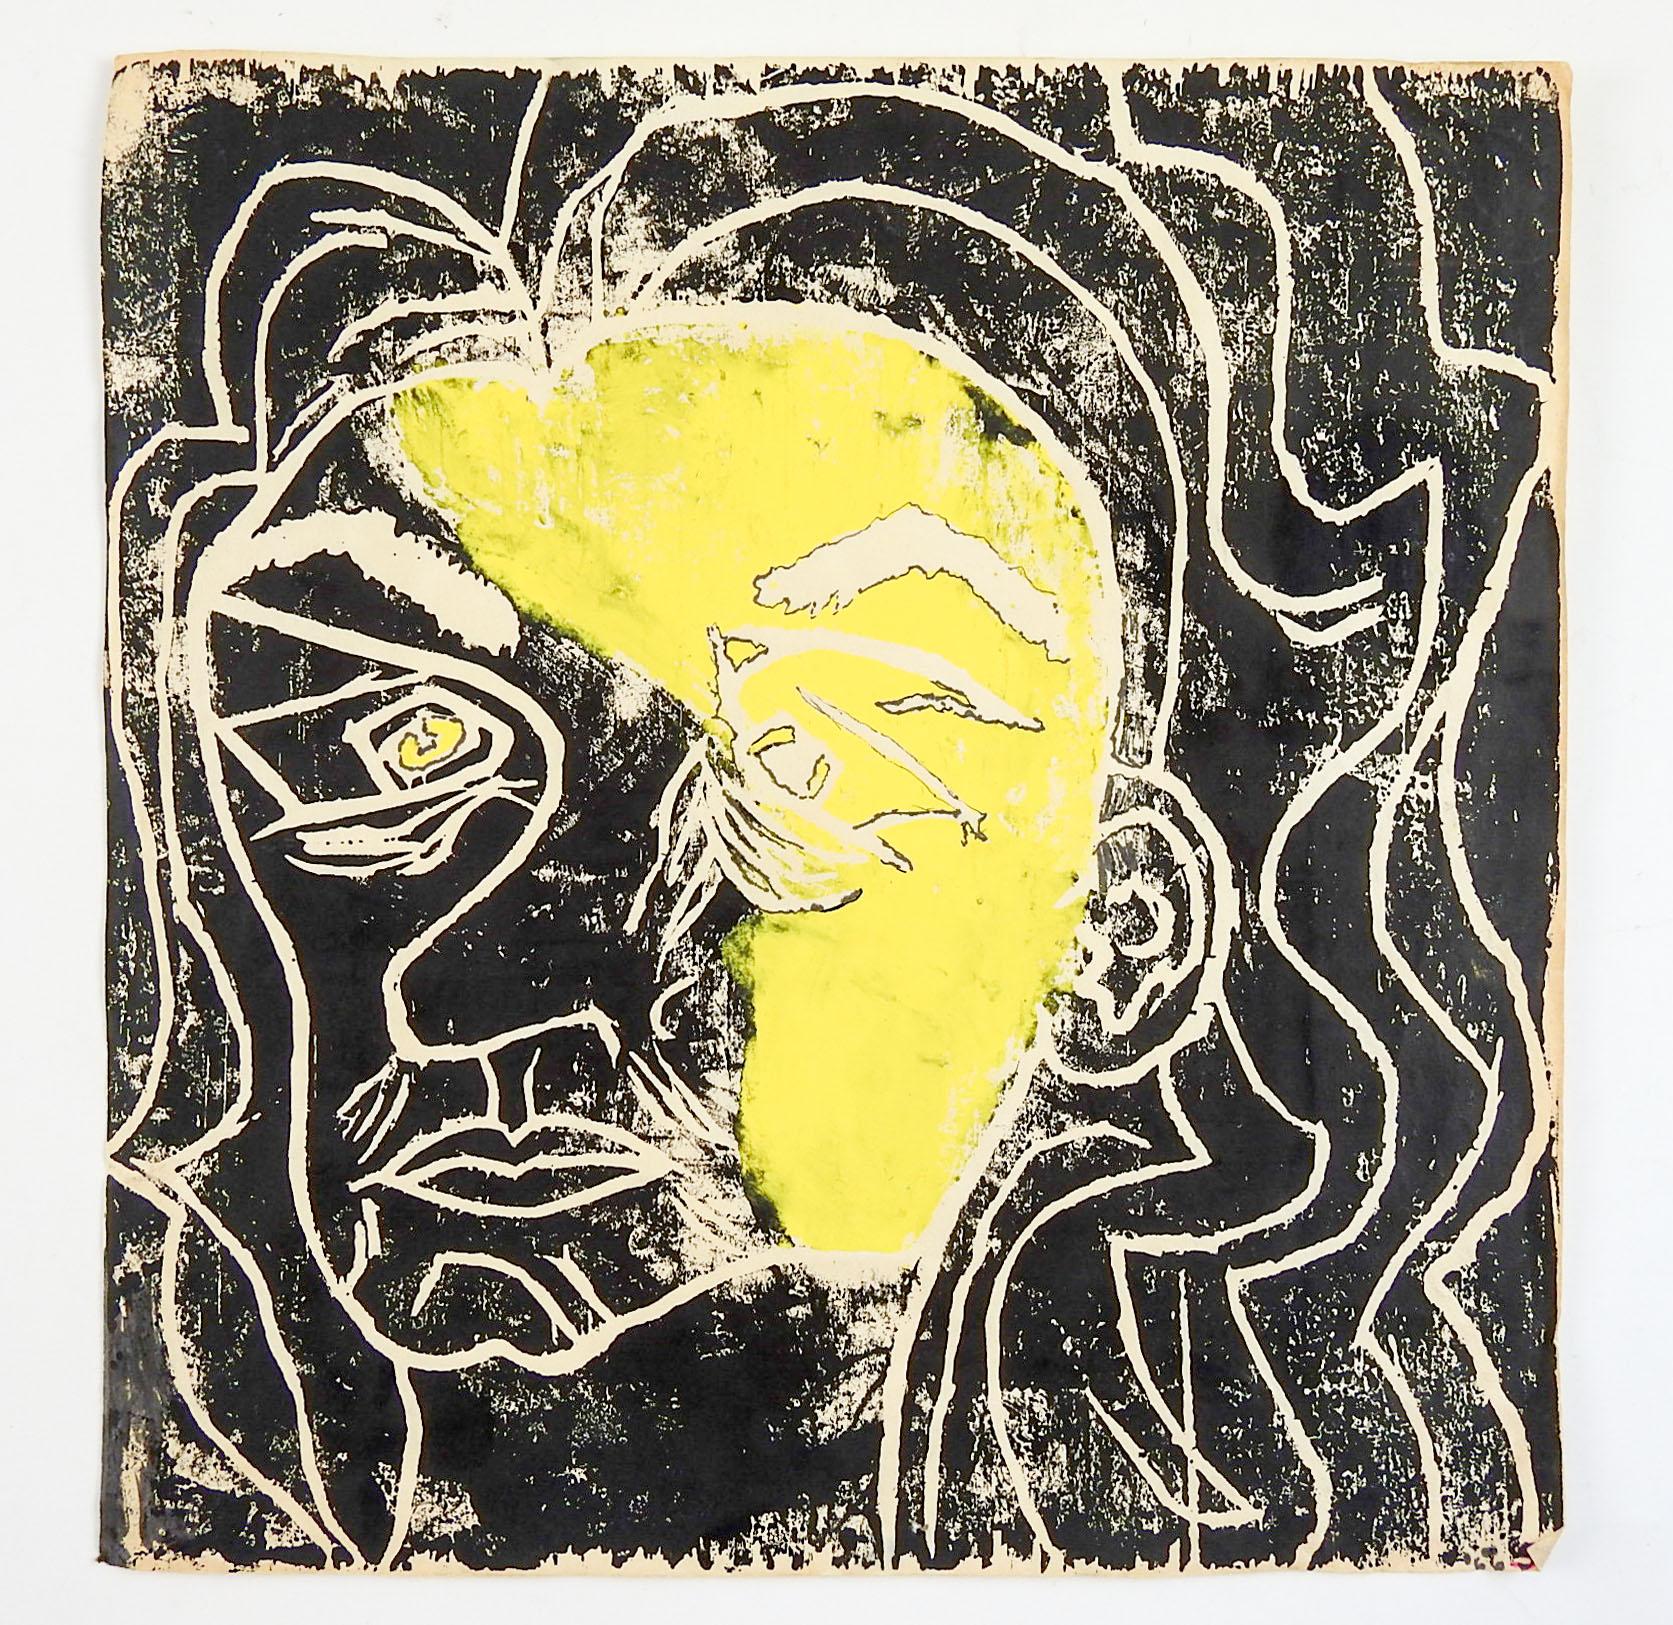 Vintage mid 20th century abstract block print portrait in yellow and black. Unsigned. Unframed, age toning, edge wear.